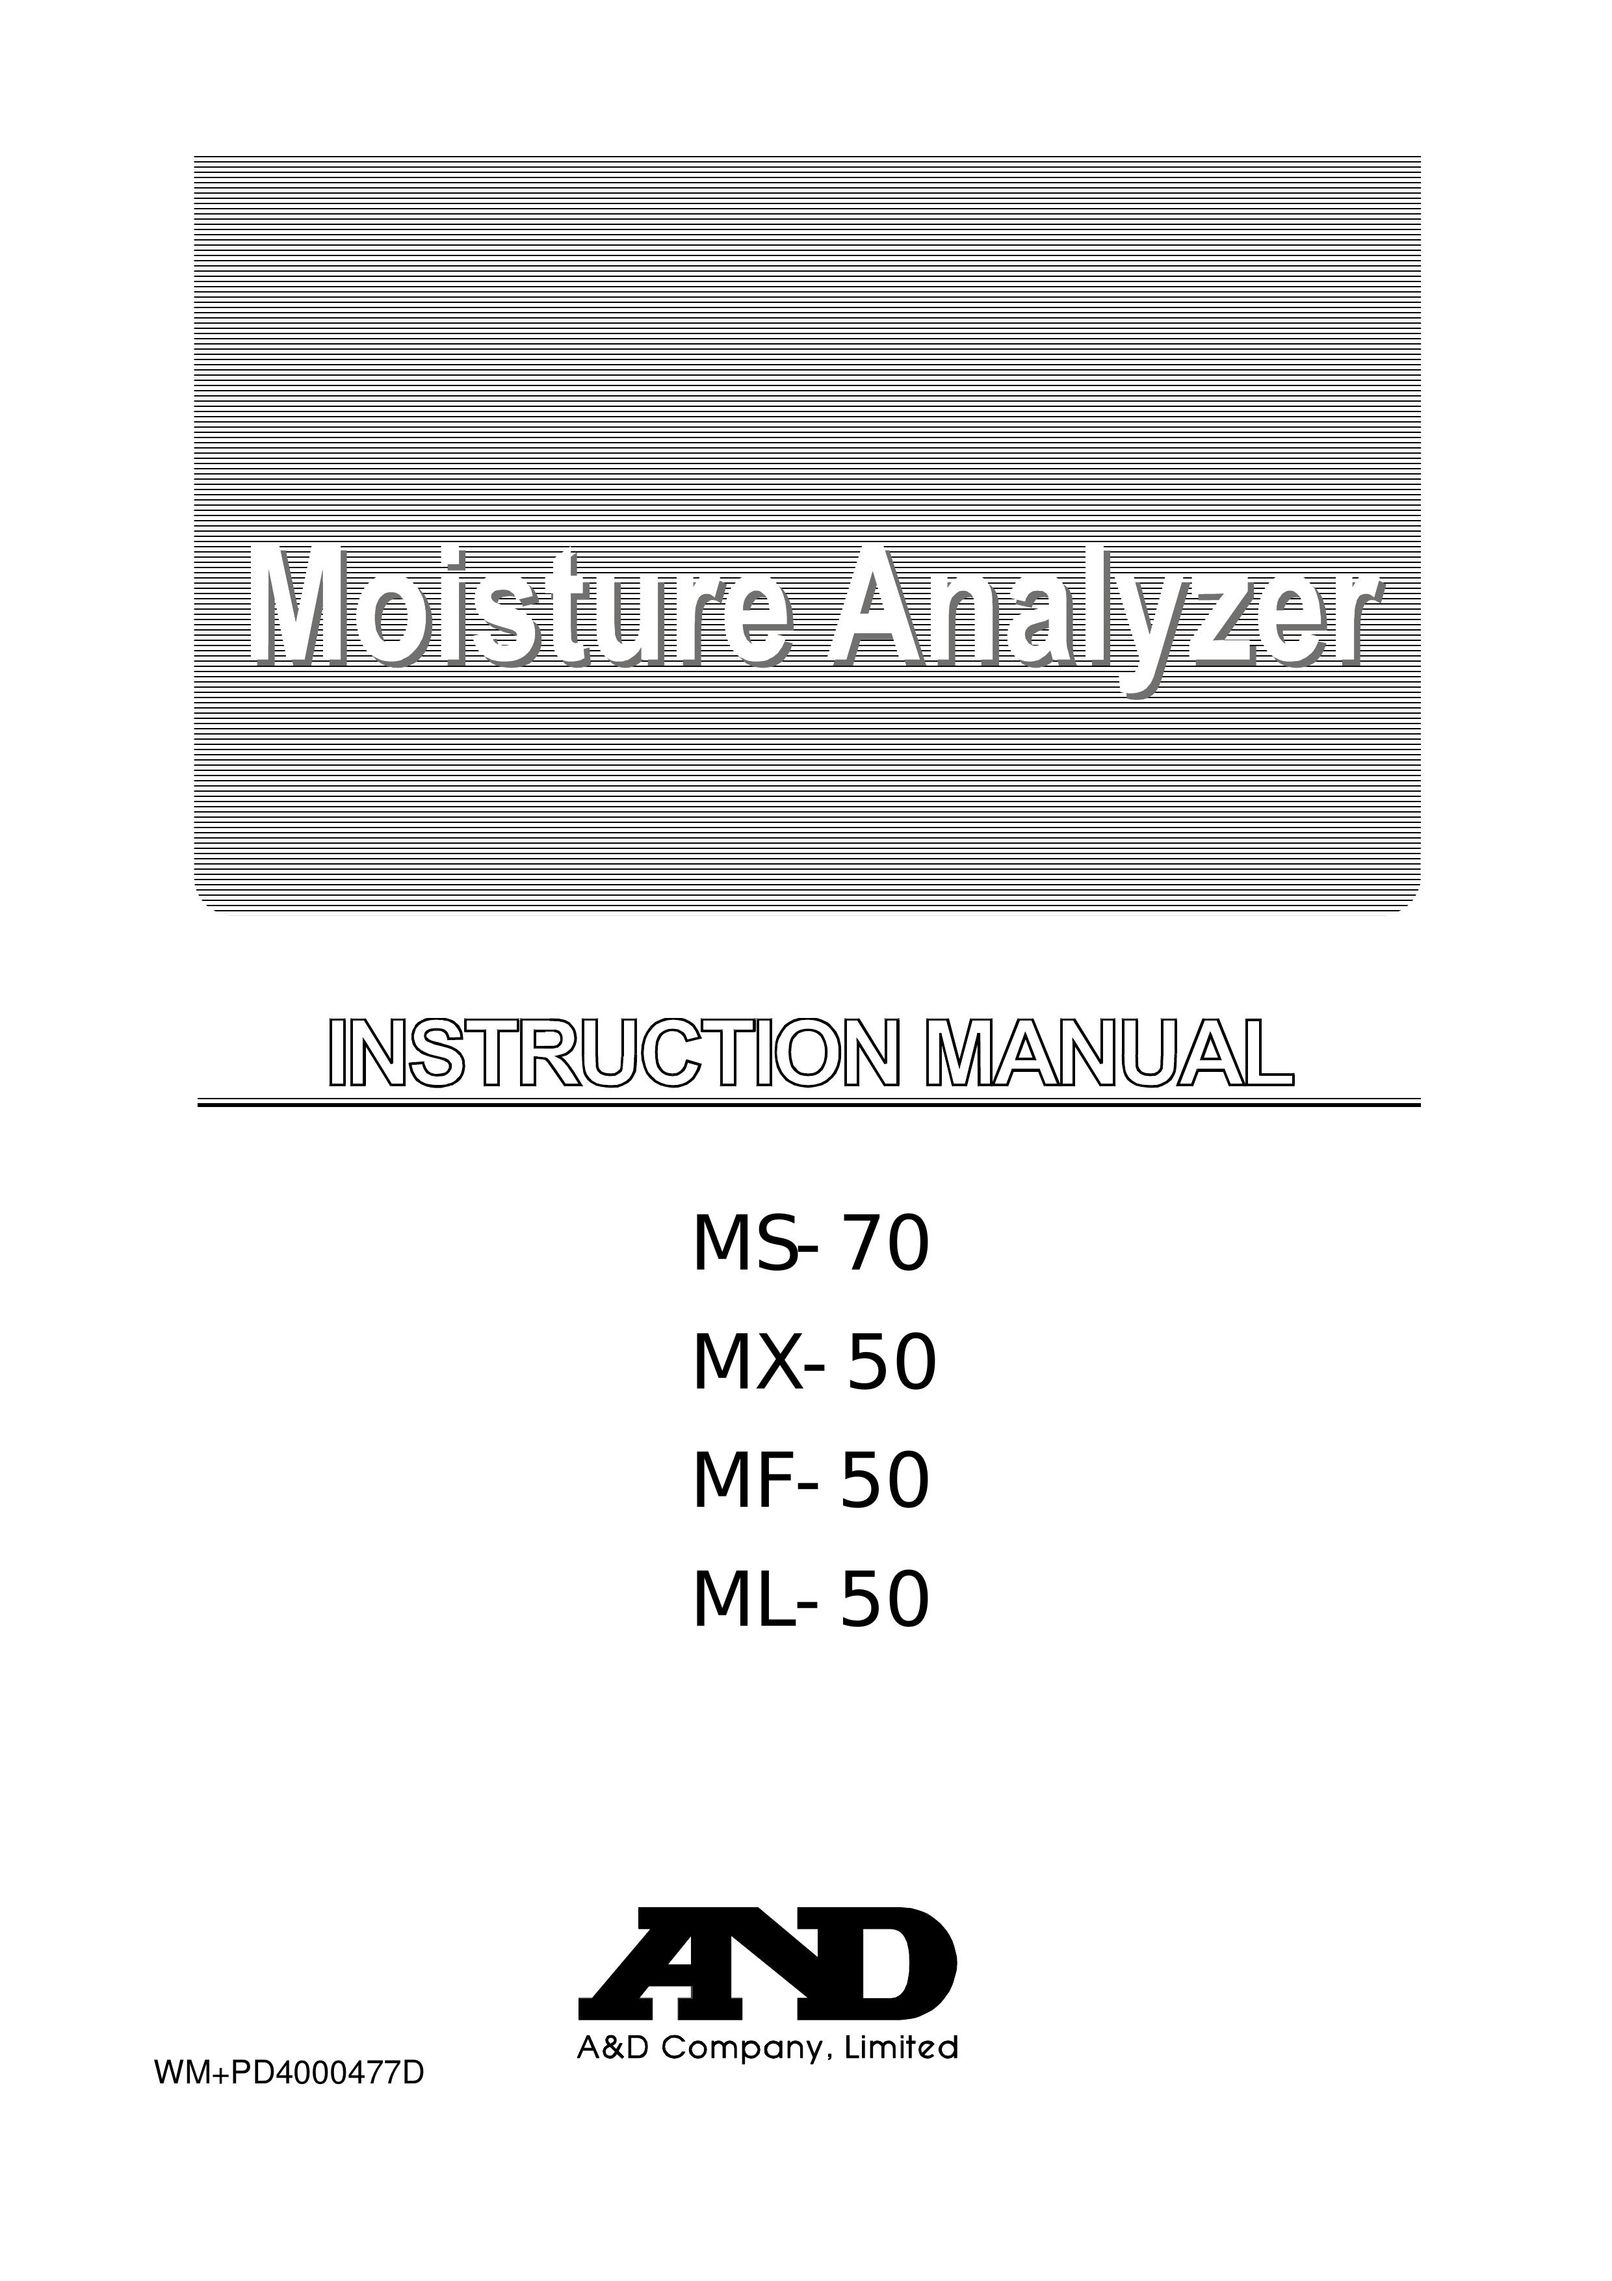 A&D MX-50 Thermostat User Manual